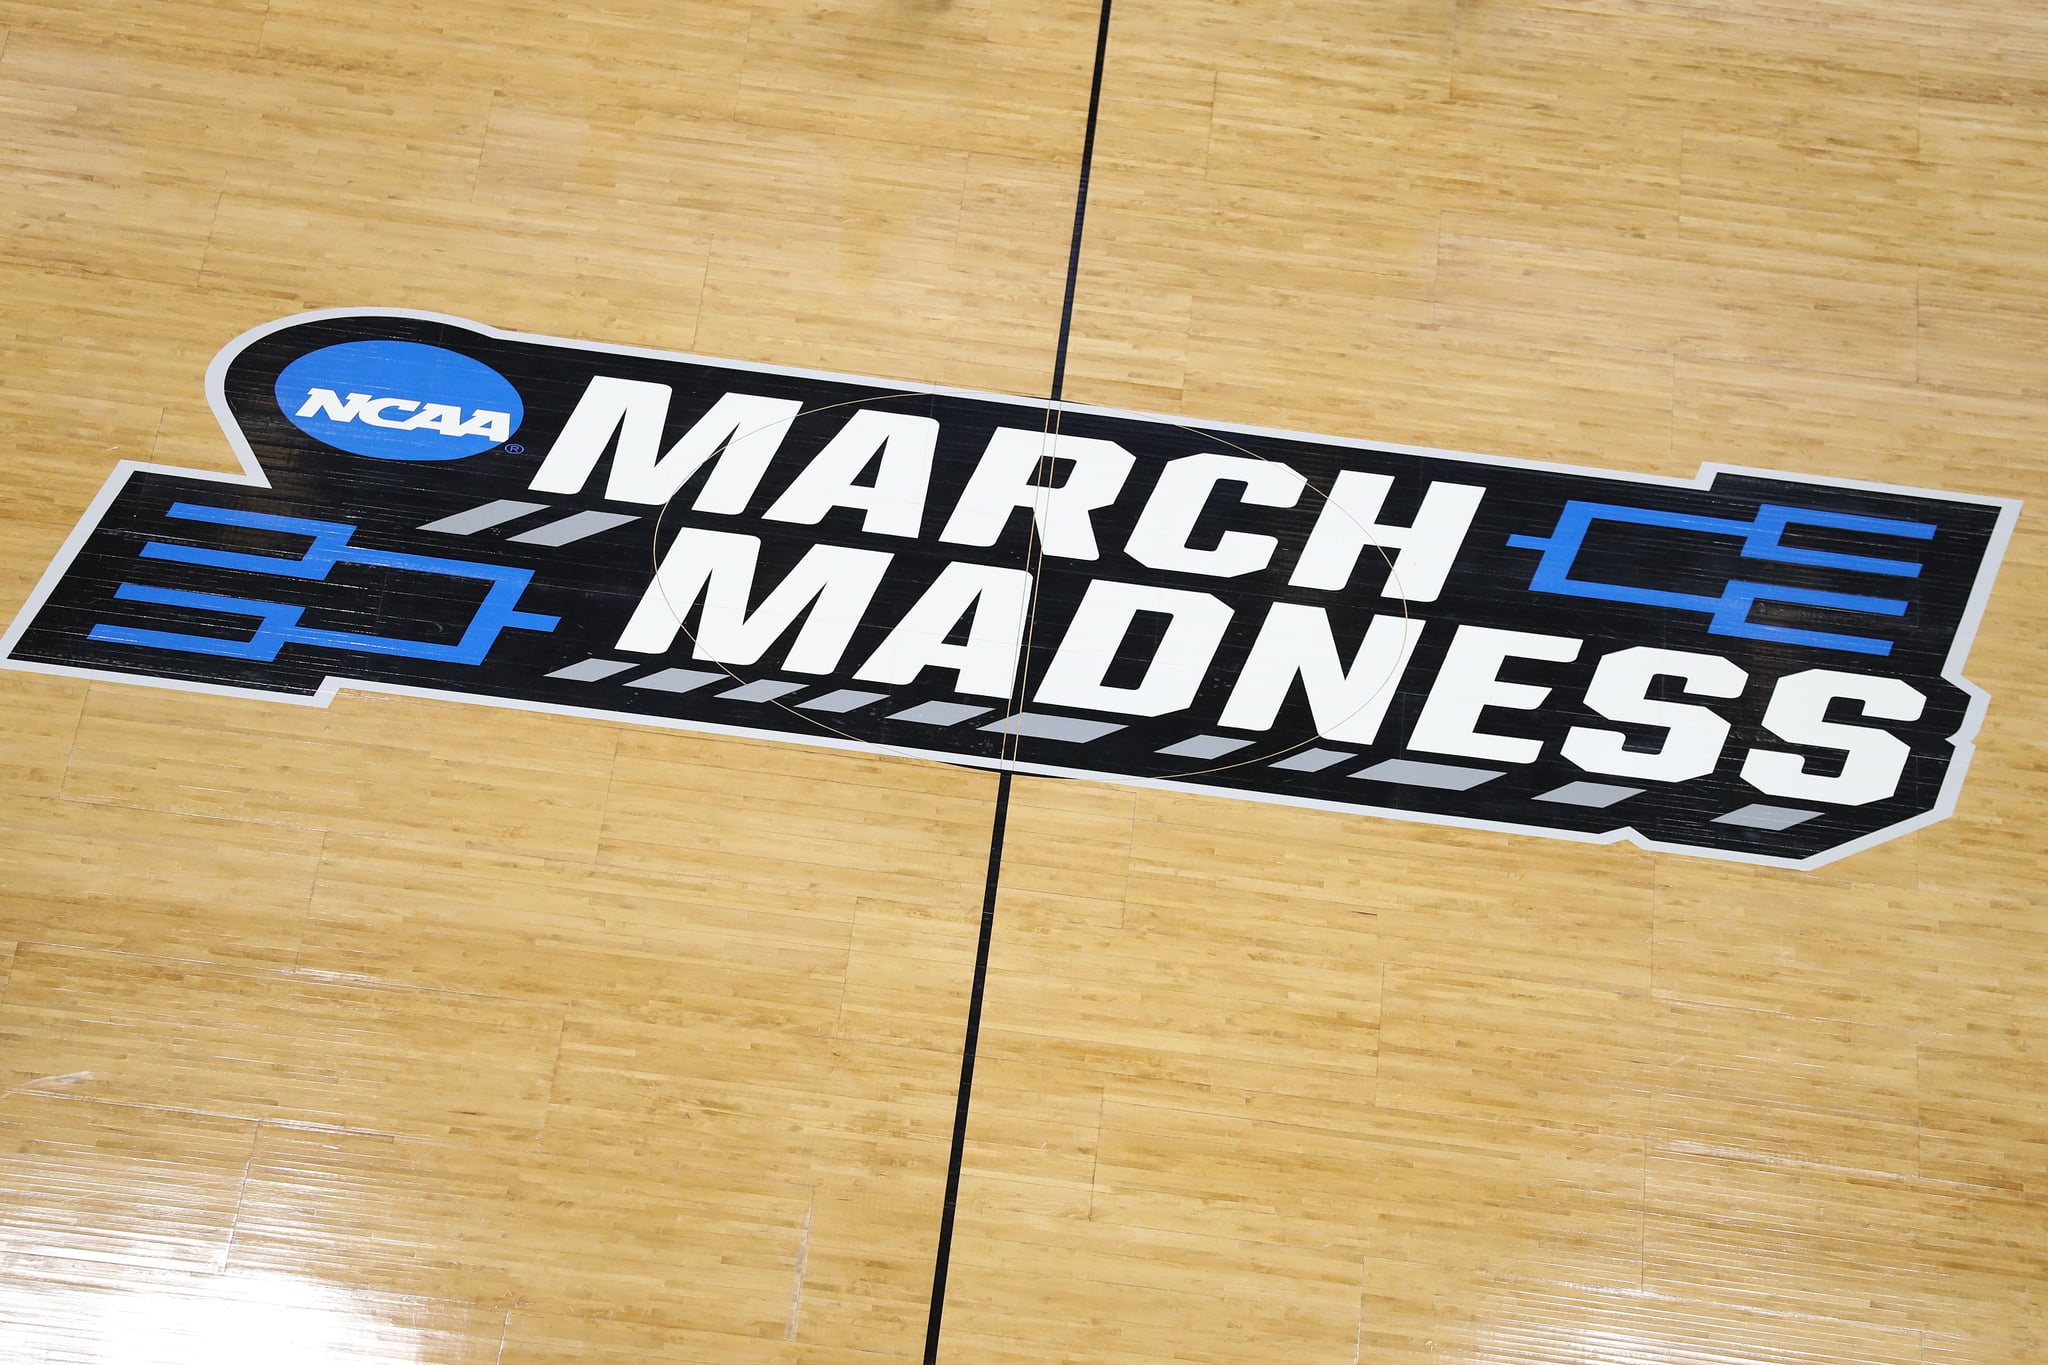 SALT LAKE CITY, UTAH - MARCH 20:  A general view of a 'March Madness' logo is seen during practice before the First Round of the NCAA Basketball Tournament at Vivint Smart Home Arena on March 20, 2019 in Salt Lake City, Utah. (Photo by Patrick Smith/Getty Images)